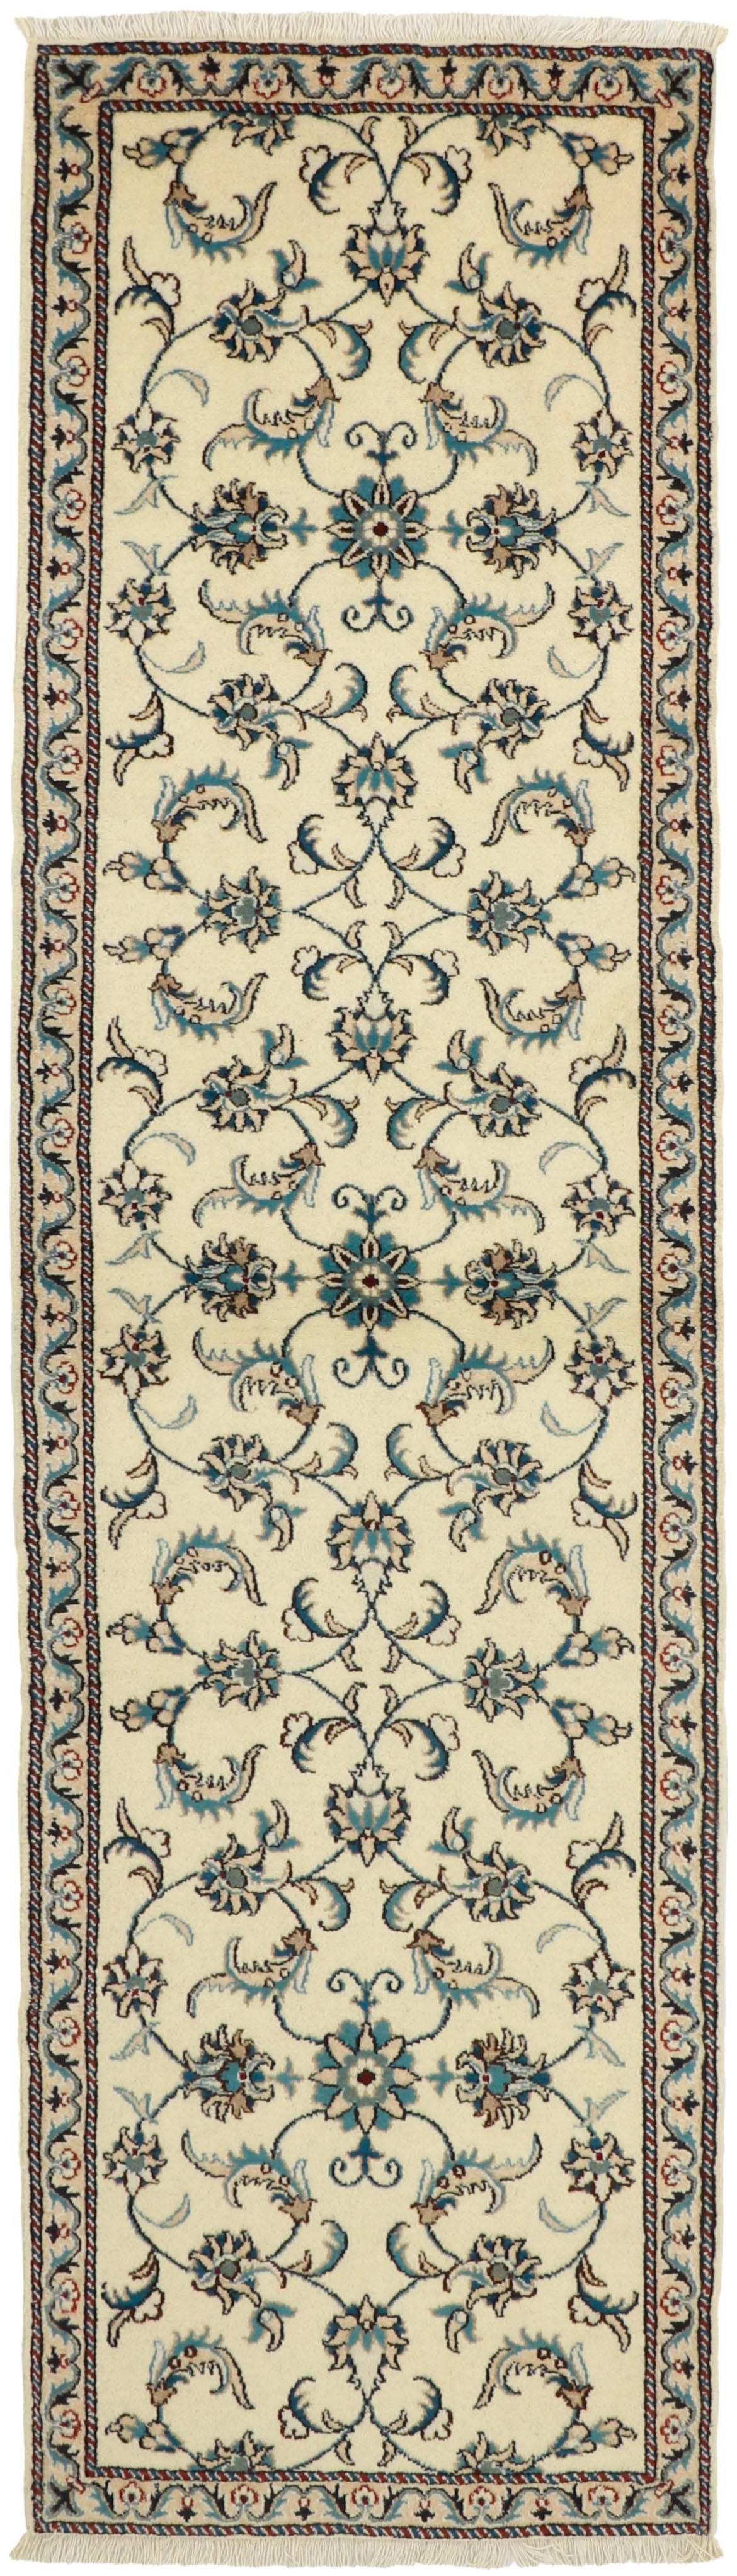 authentic persian runner with a cream floral design